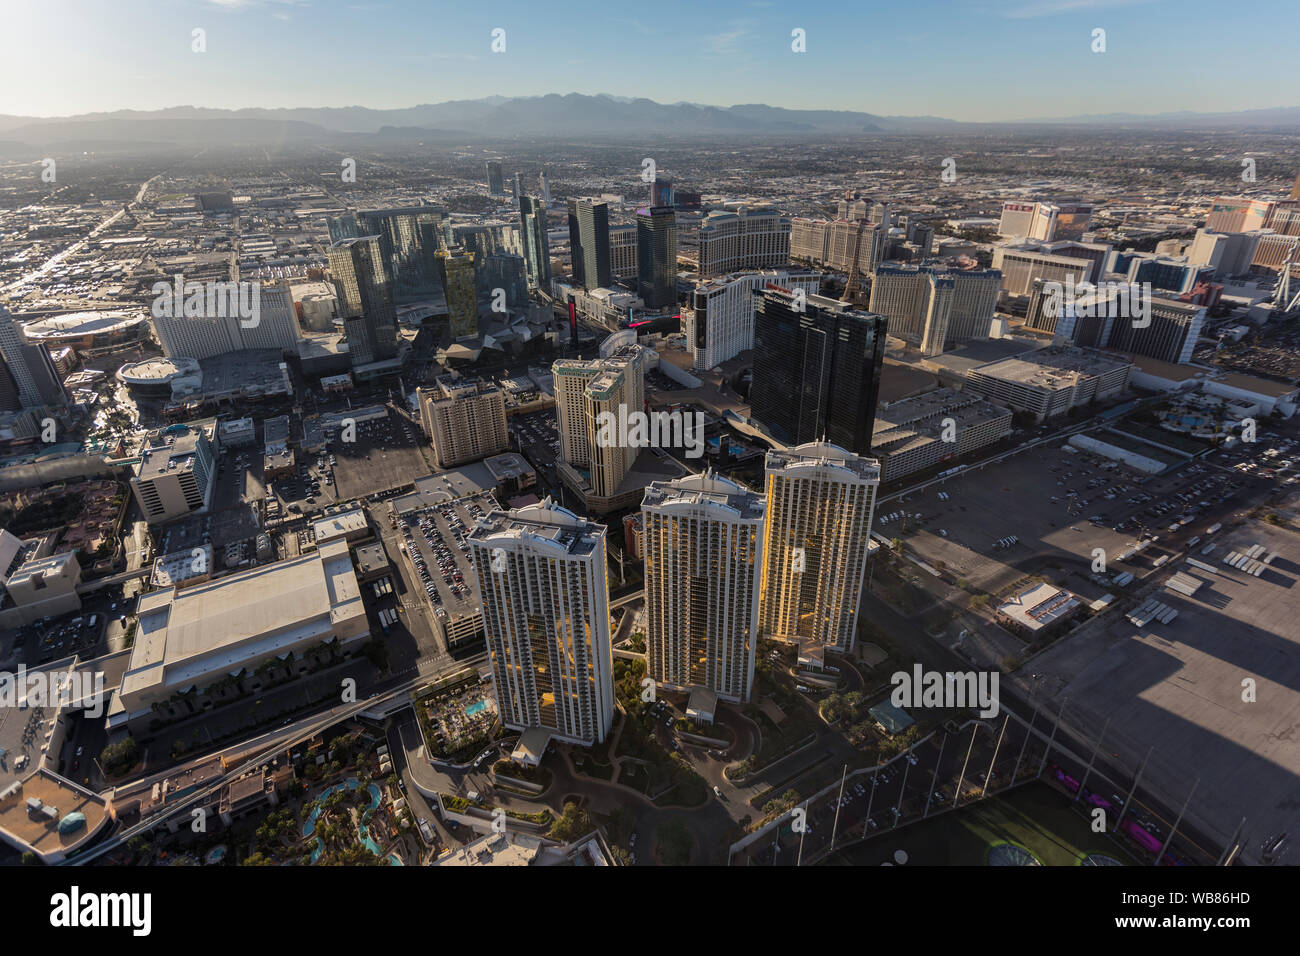 Las Vegas, Nevada, USA - March 13, 2017:  Aerial view of Signature at MGM, Hilton Grand Vacations and other resort towers near the Las Vegas Strip. Stock Photo